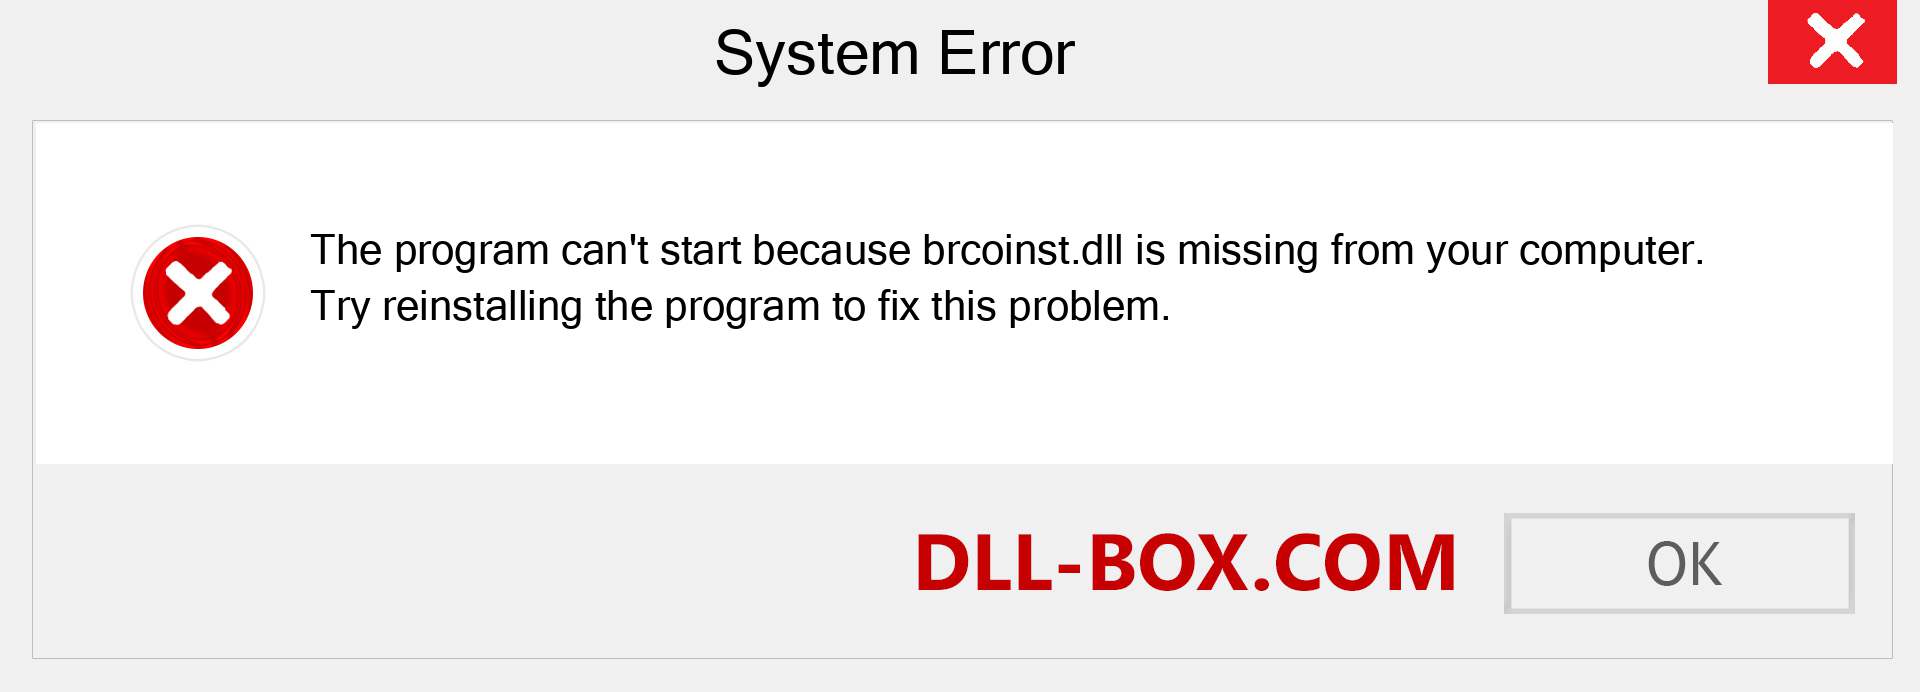  brcoinst.dll file is missing?. Download for Windows 7, 8, 10 - Fix  brcoinst dll Missing Error on Windows, photos, images